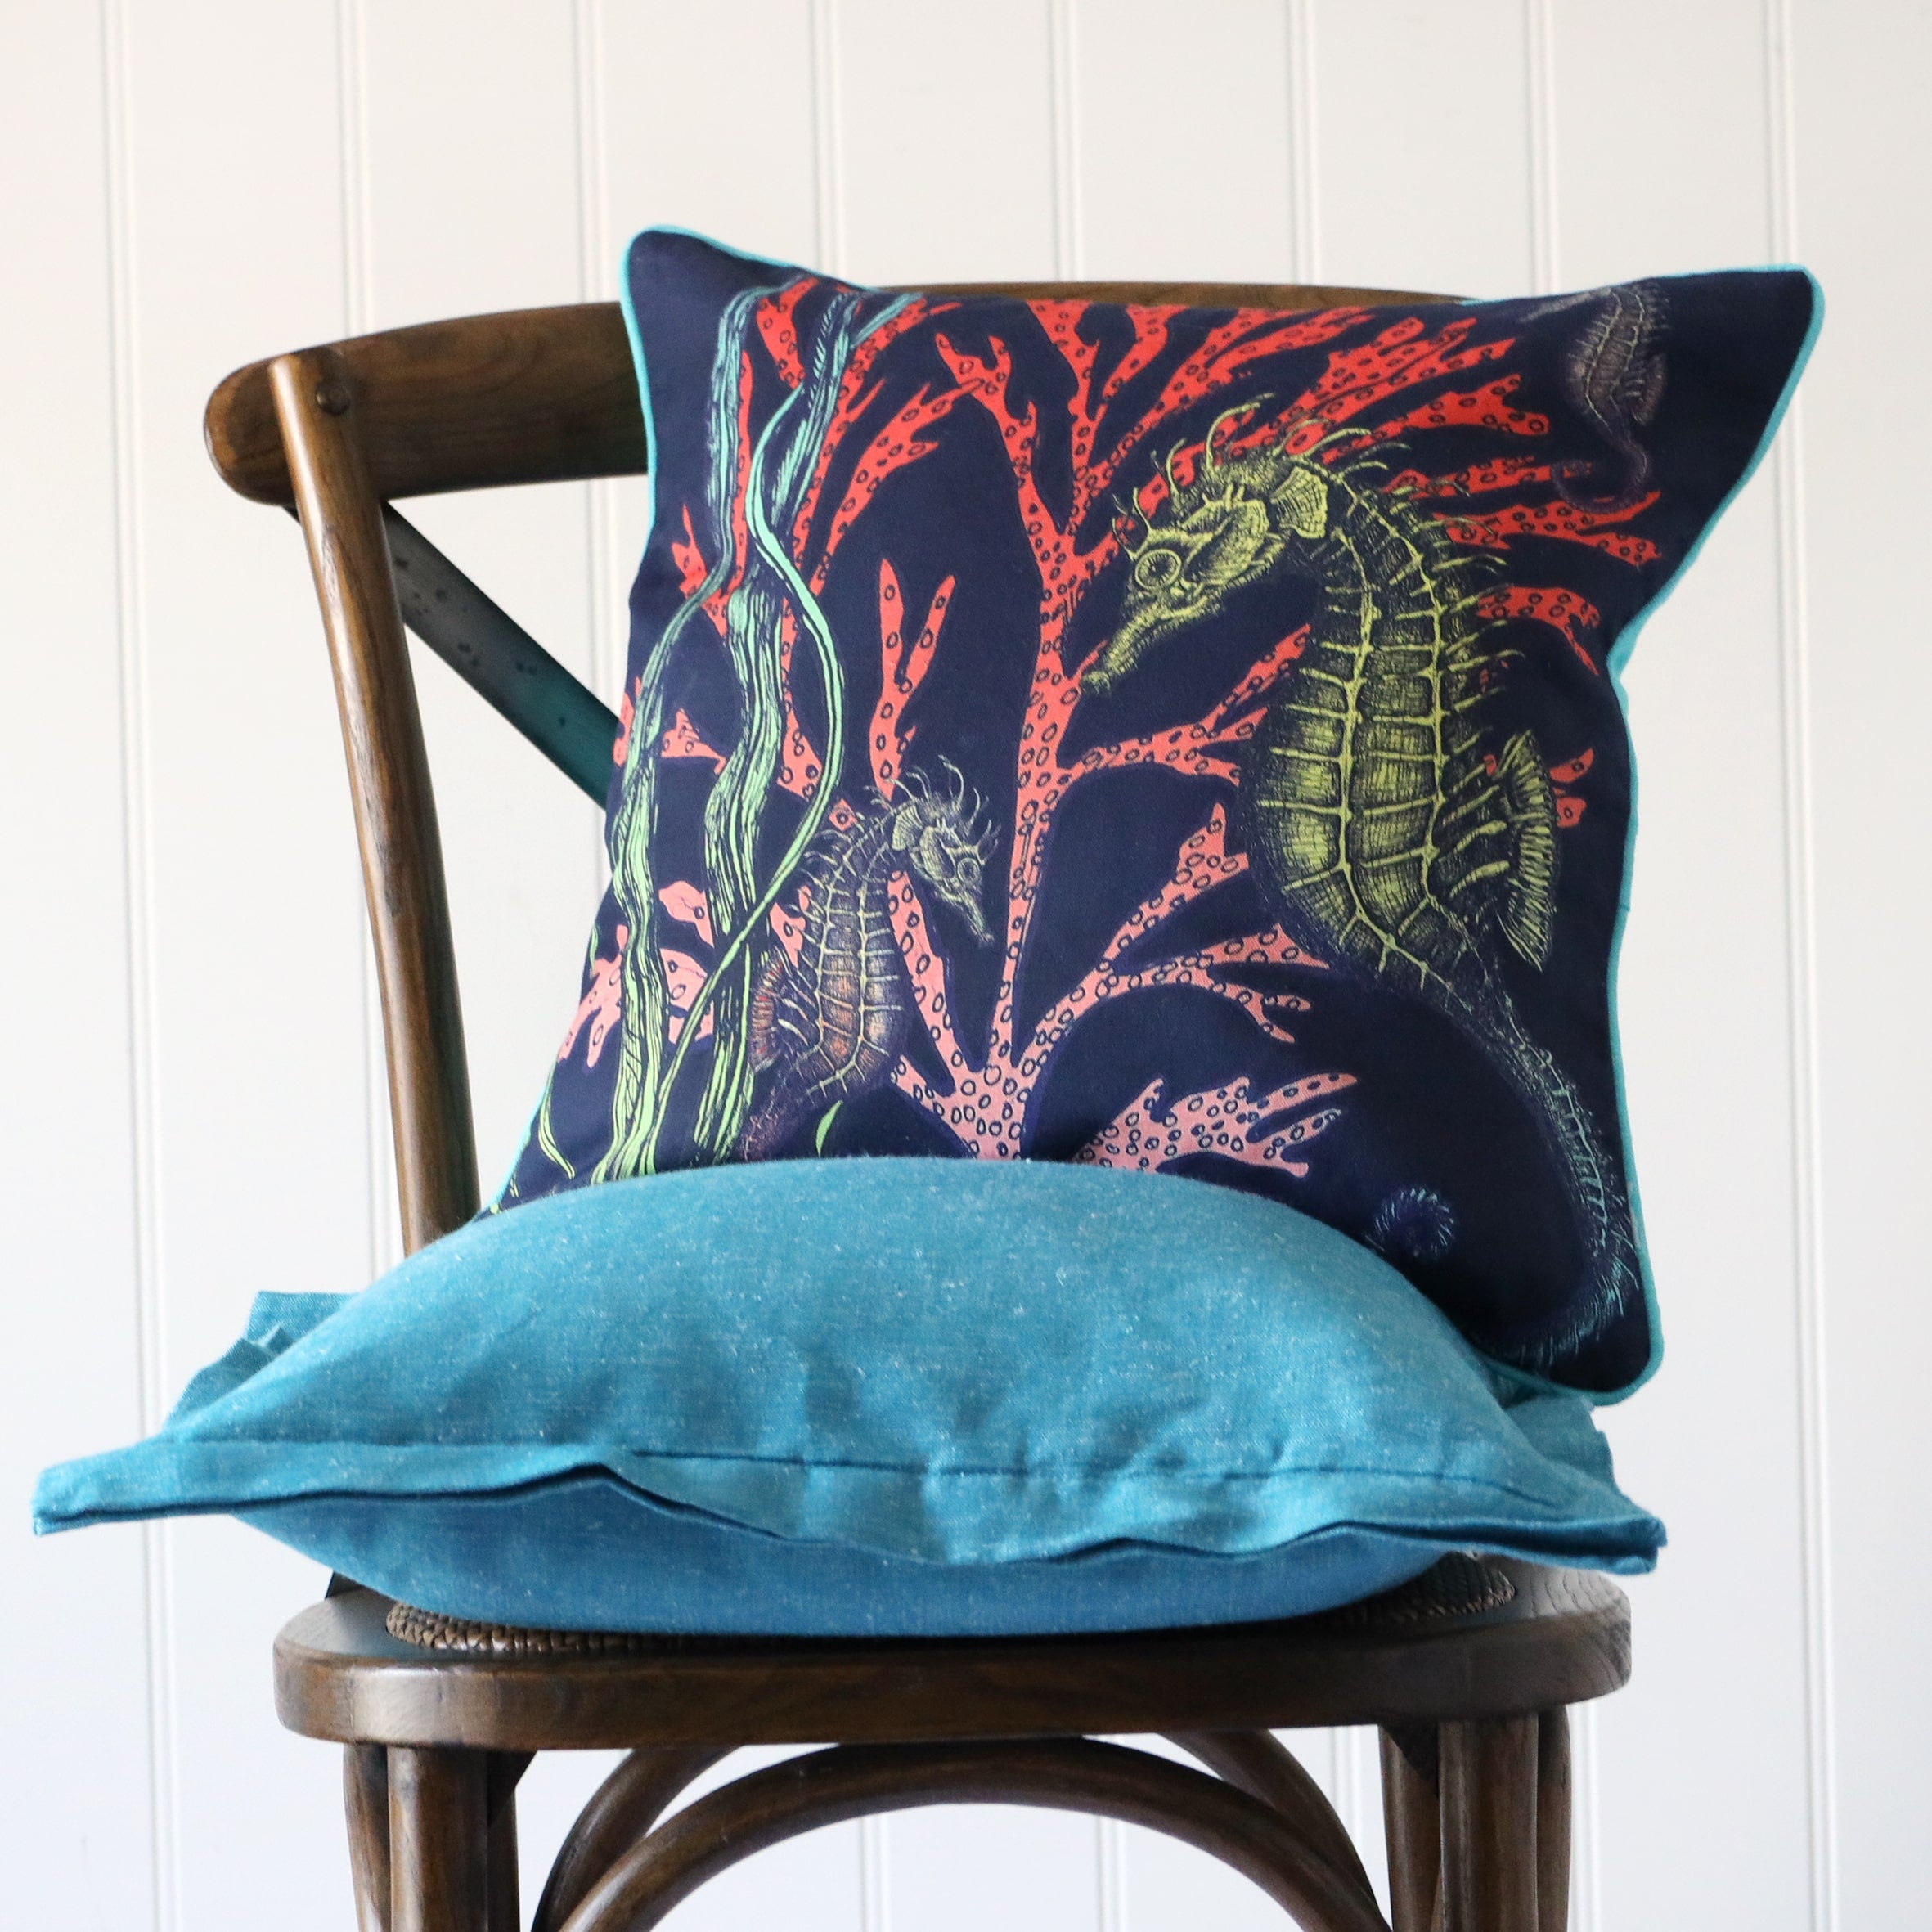 navy cushion with brightly coloured illustration of a seahorse and seaweed on the front, placed on a turquoise linen cushion on a wooden chair